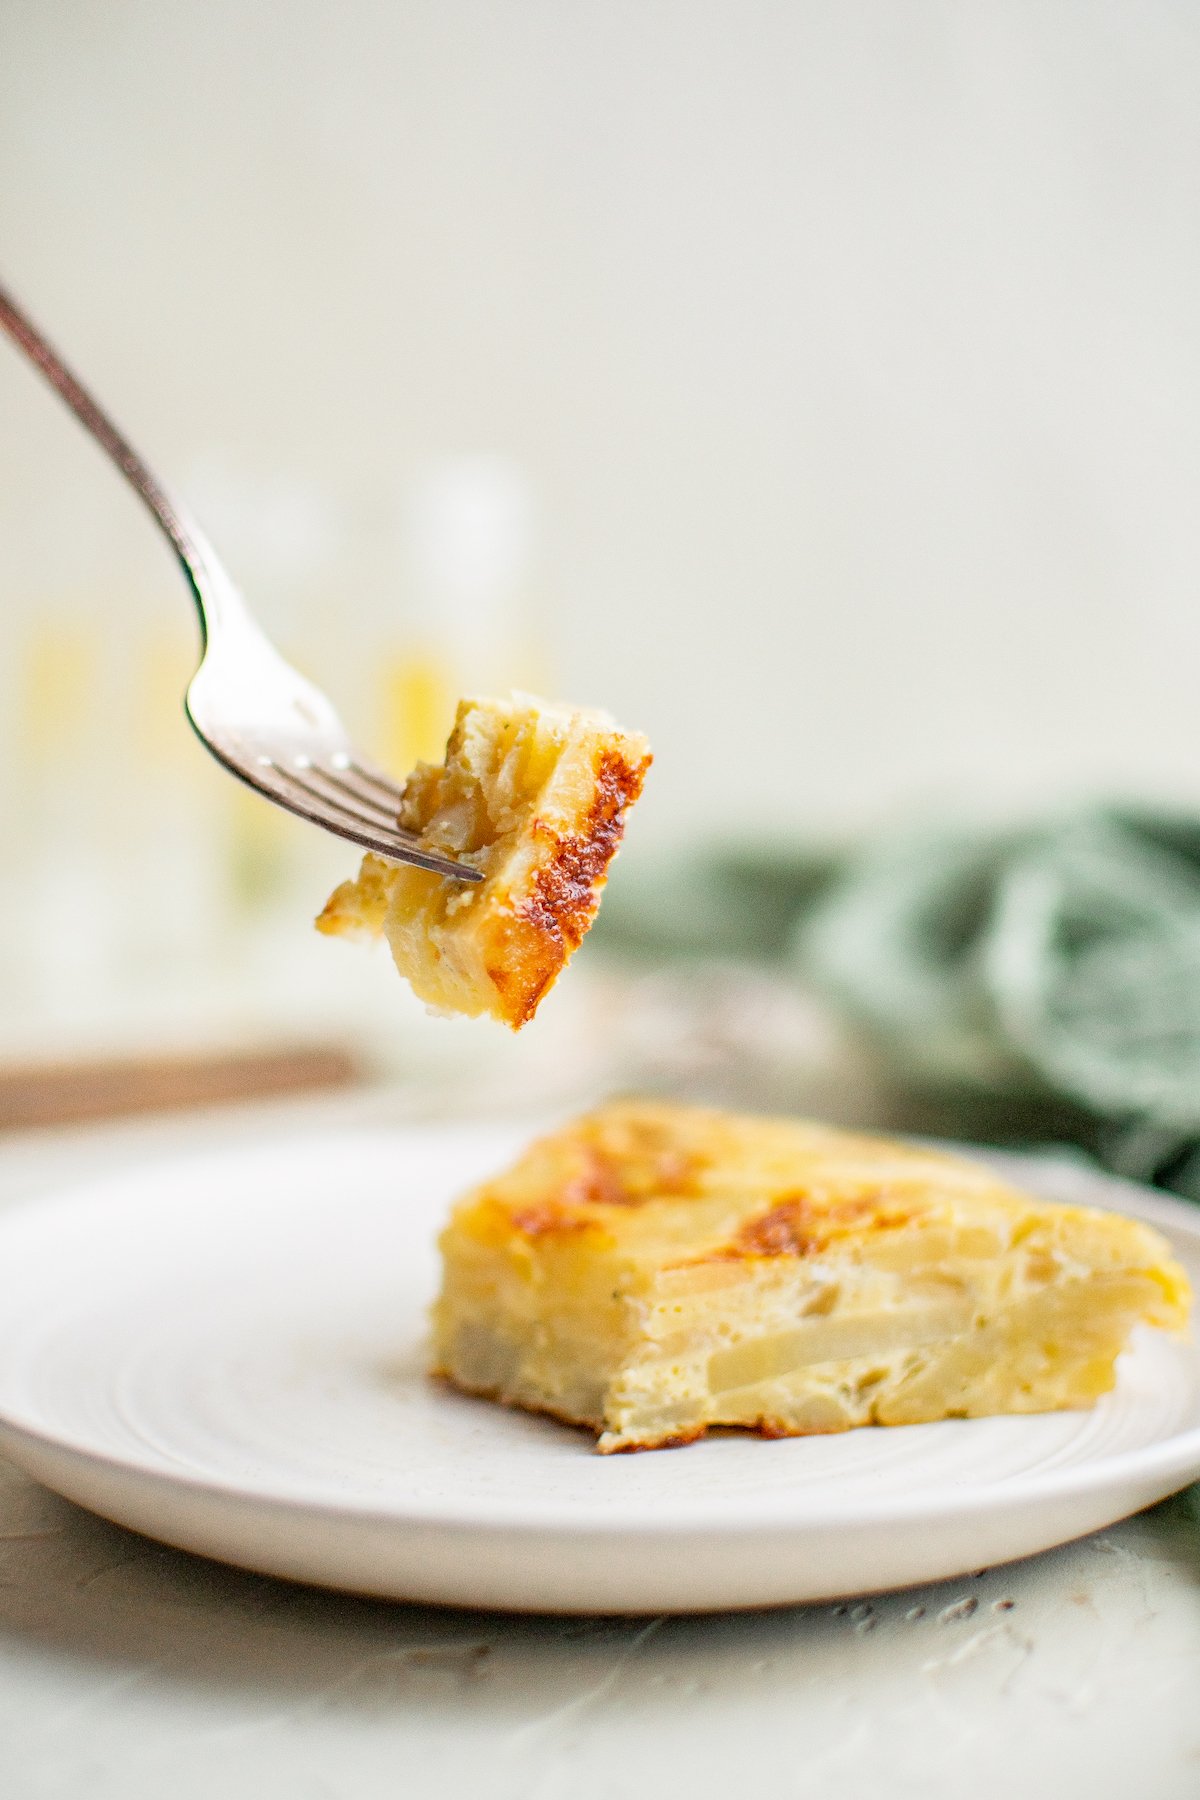 A plate with a slice of tortilla española, with a fork taking a bite away